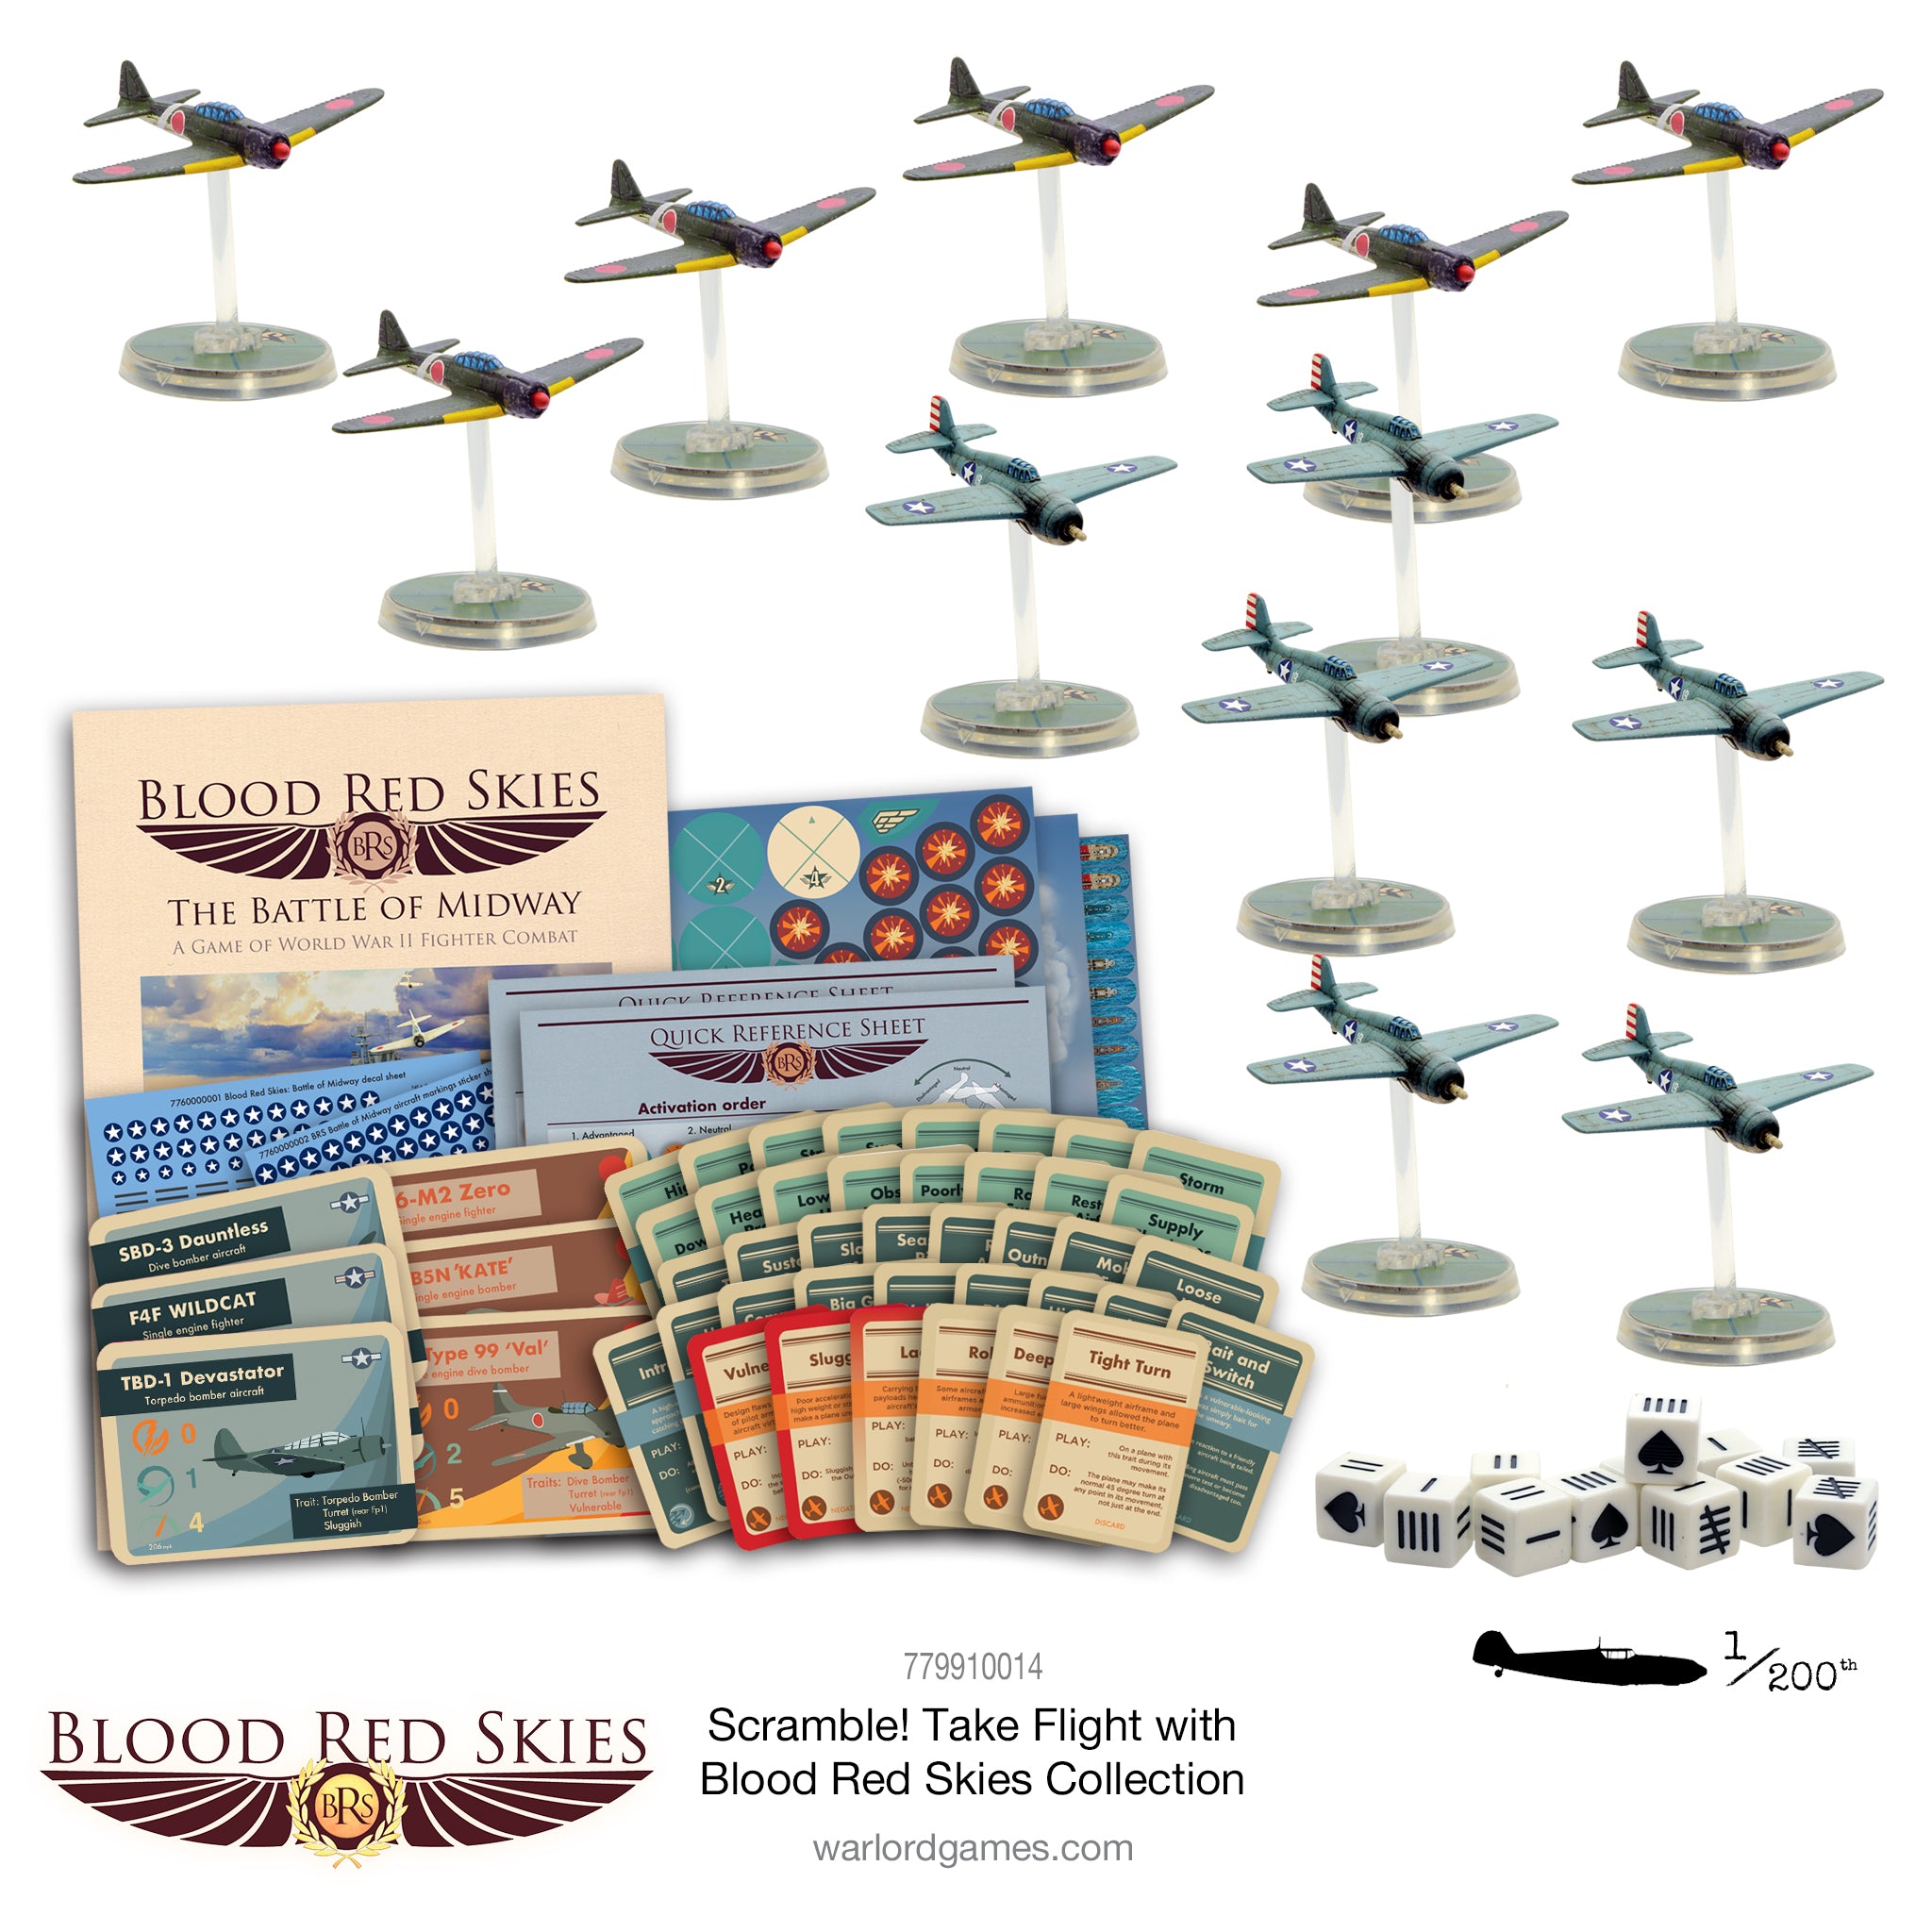 Scramble! Take Flight with Blood Red Skies Collection